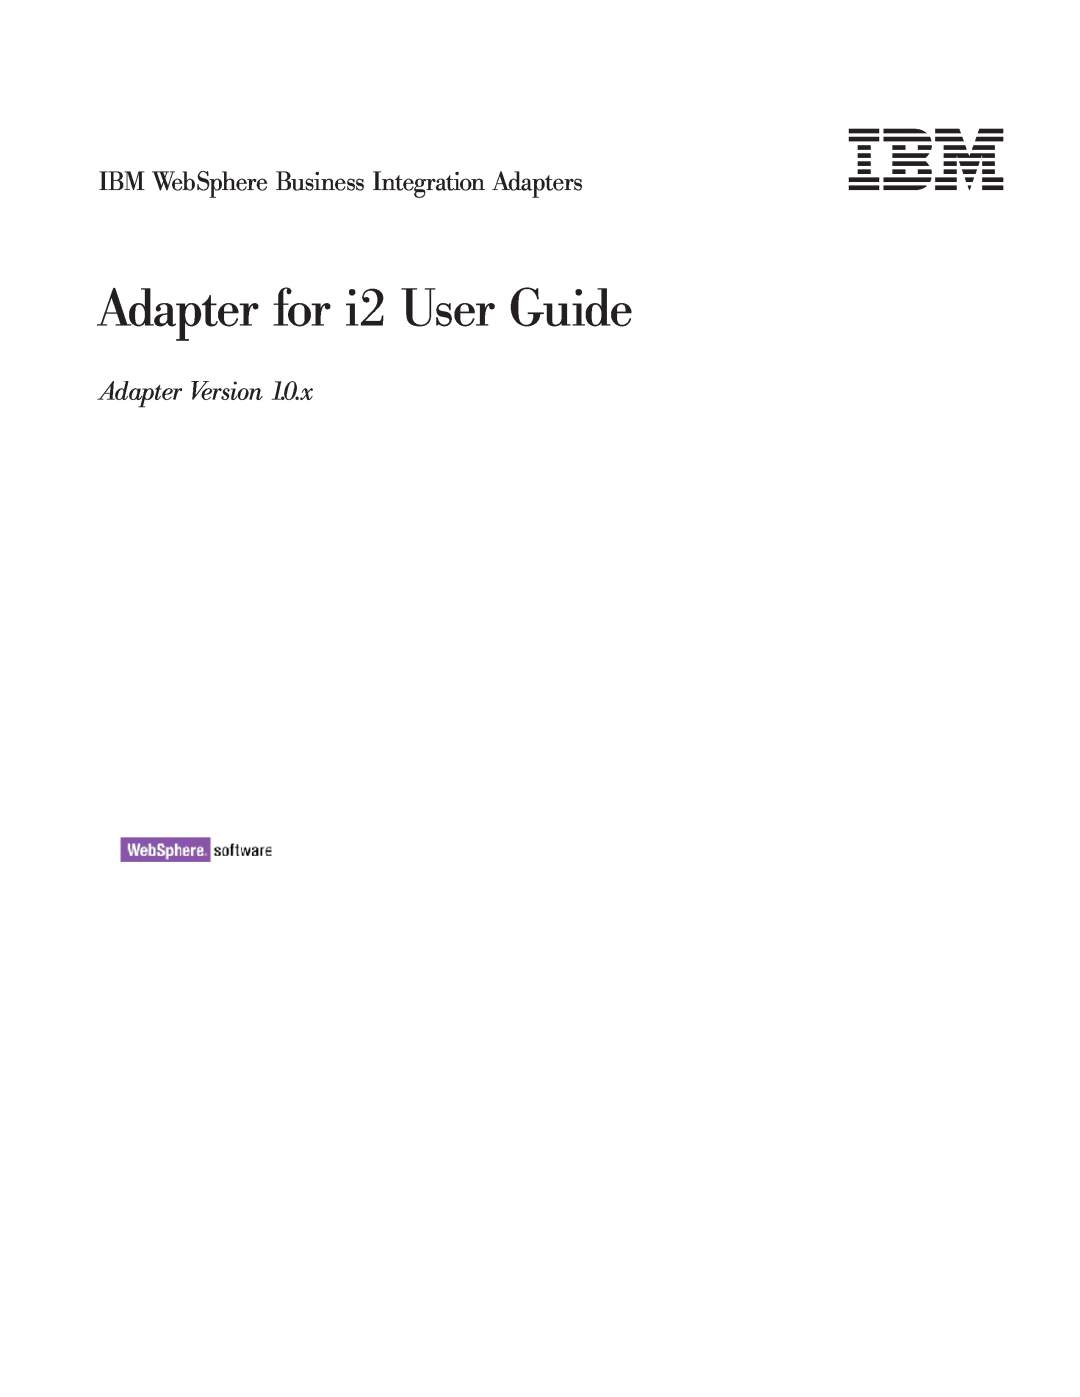 IBM manual Adapter for i2 User Guide, IBM WebSphere Business Integration Adapters, Adapter Version 